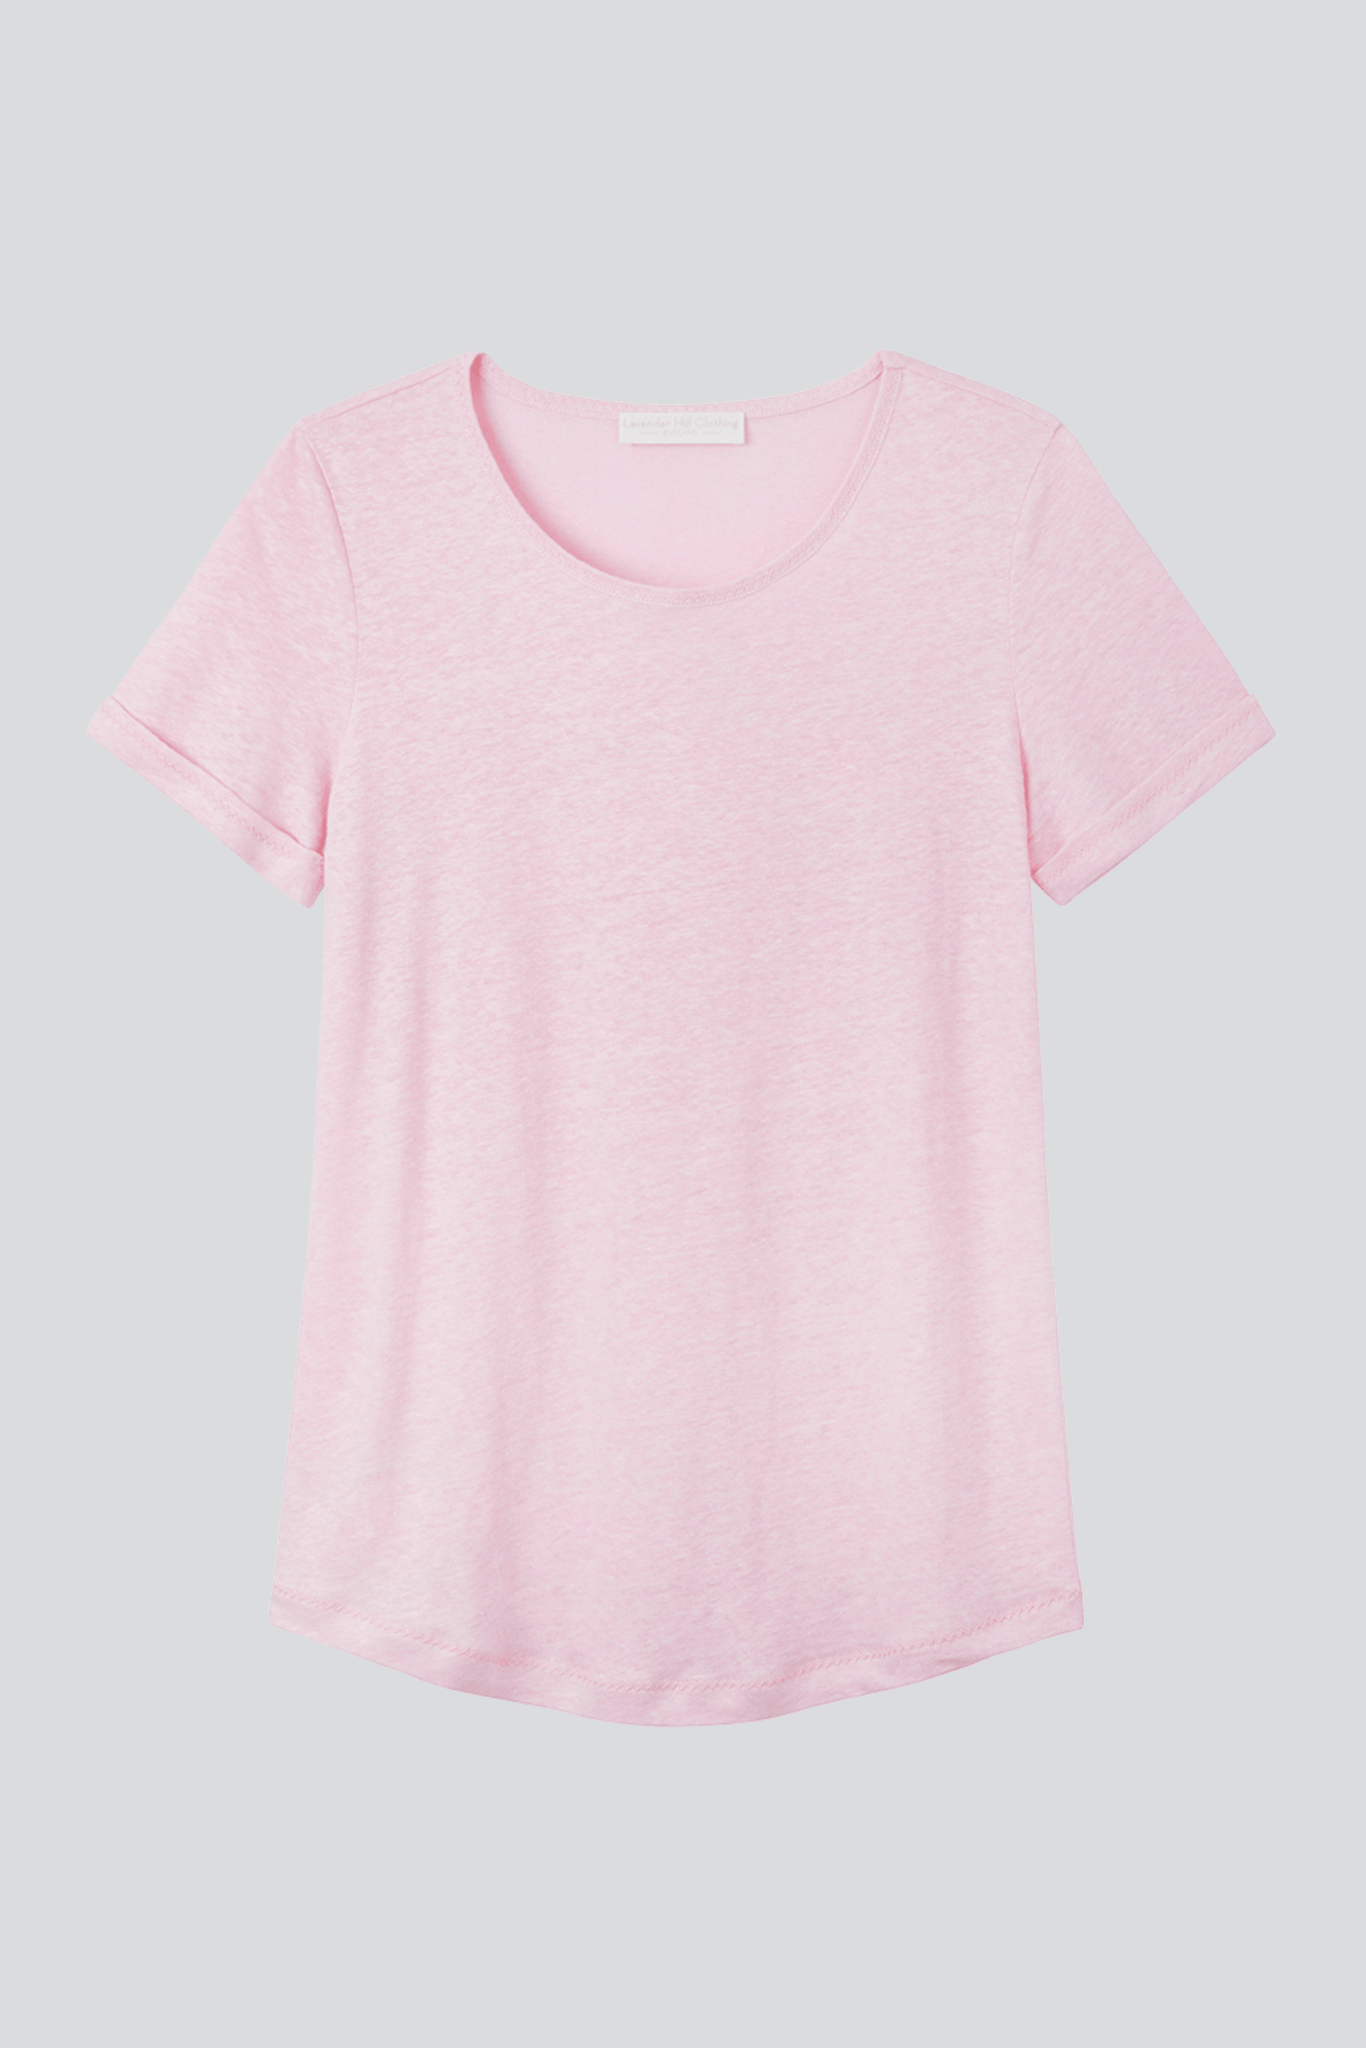 Womens quality light pink Linen T-shirt by Lavender Hill Clothing